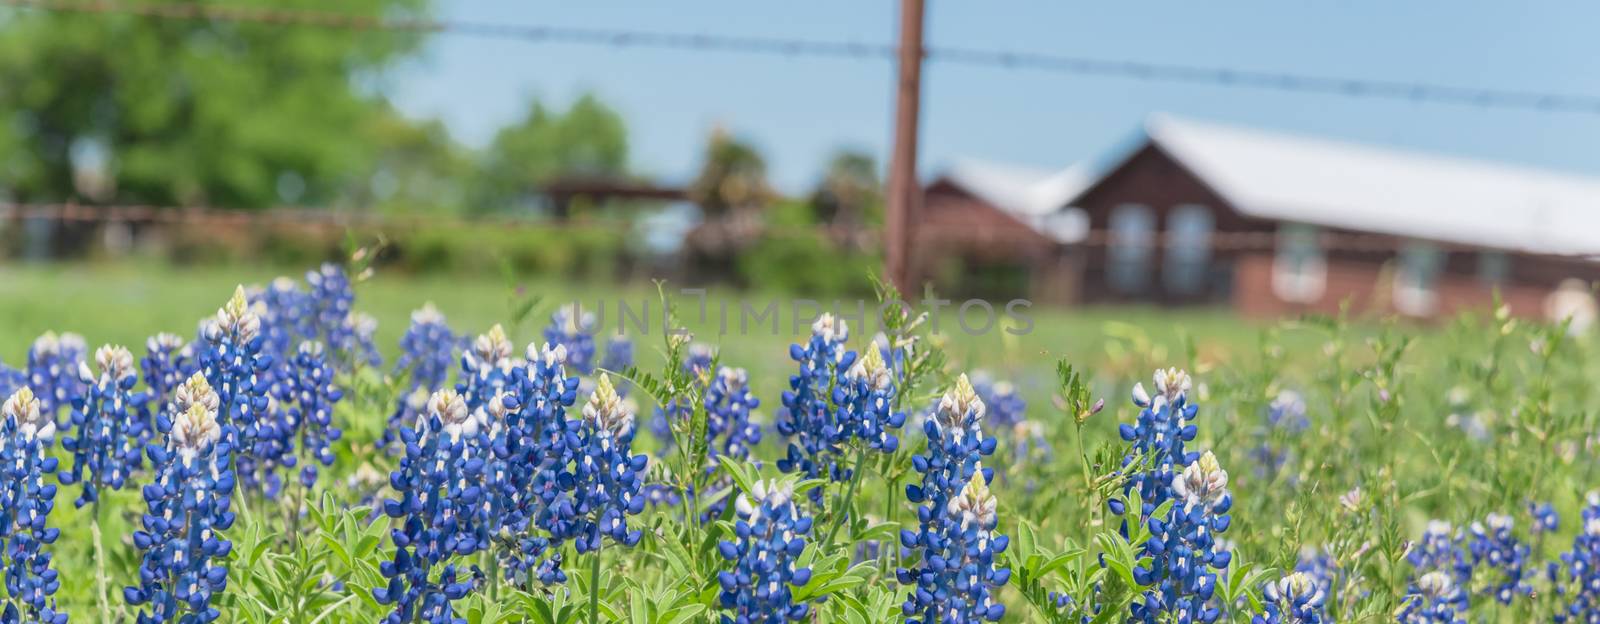 Panorama view Bluebonnet and Indian Paintbrush wildflower blooming in springtime at rural farm in Bristol, Texas, USA. Scenic life on the ranch with rustic fence